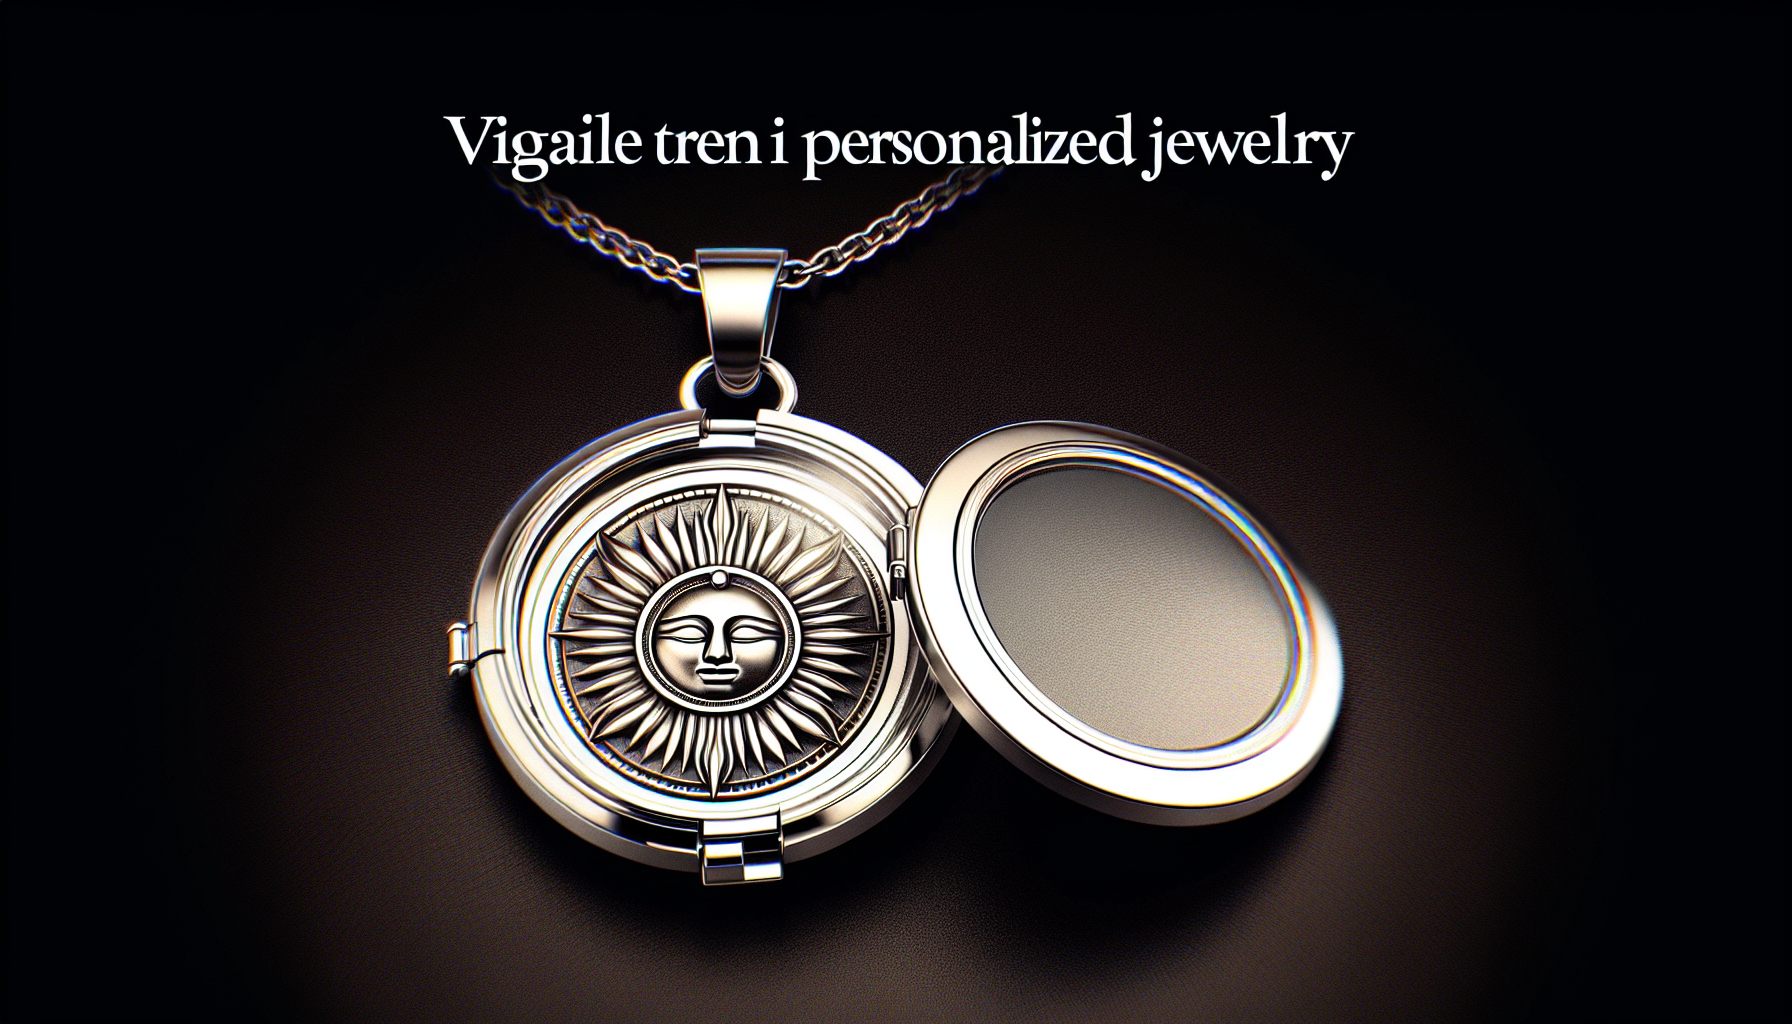 Visualize a new trend in personalized jewelry in the form of a locket. This particular locket is extra special because it features the symbol of Inti, the Incan Sun God. Picture a delicately crafted p